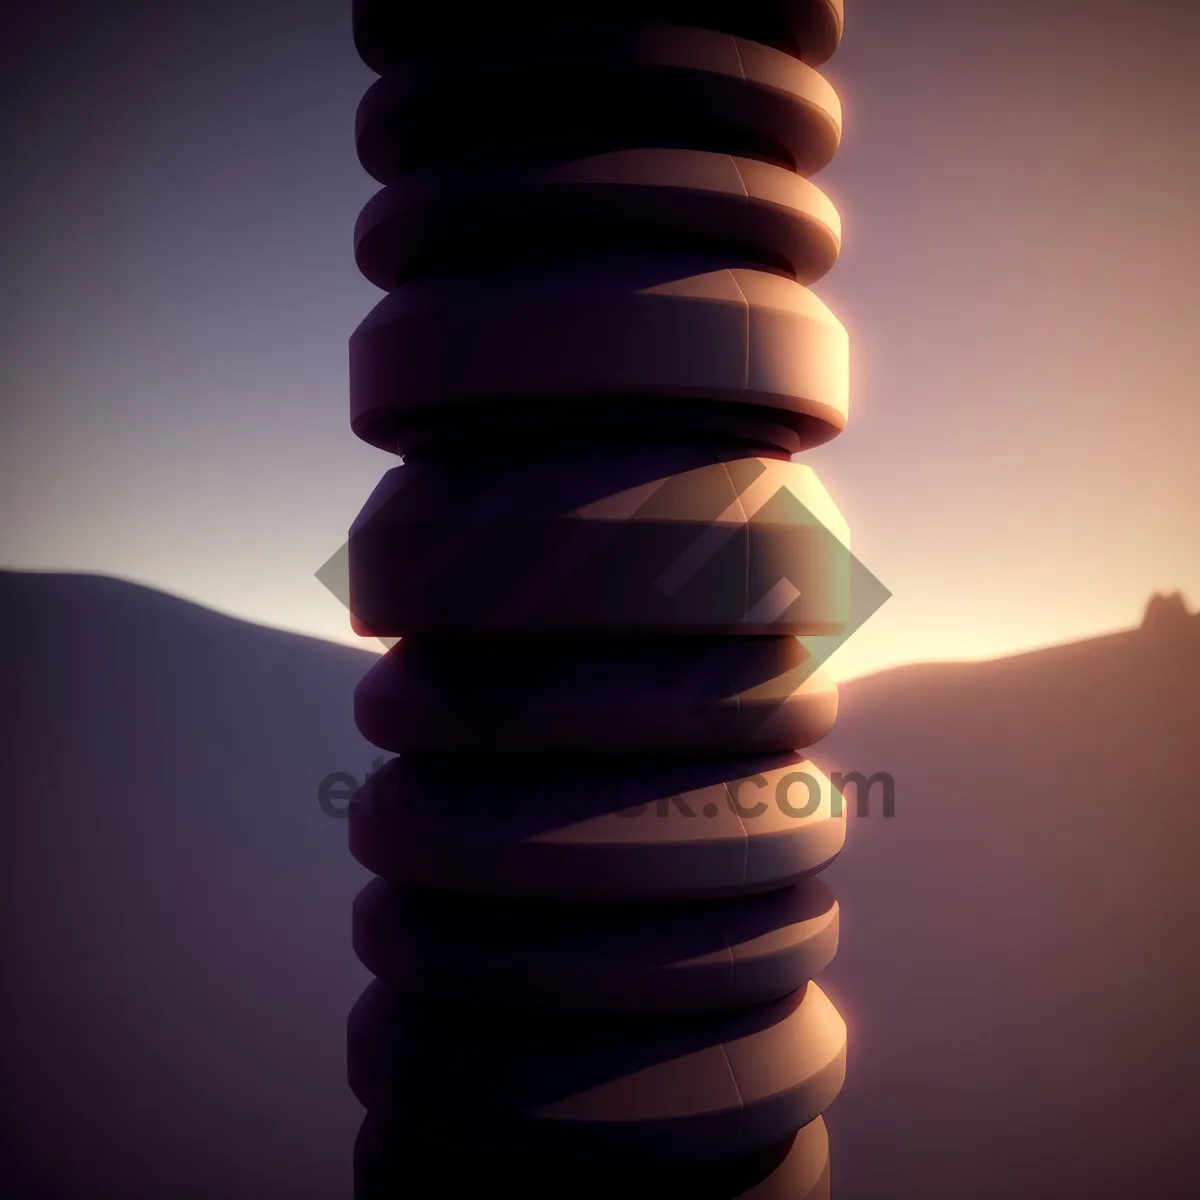 Picture of Stacked Coin Tower: Symbolizing Business Savings and Financial Growth